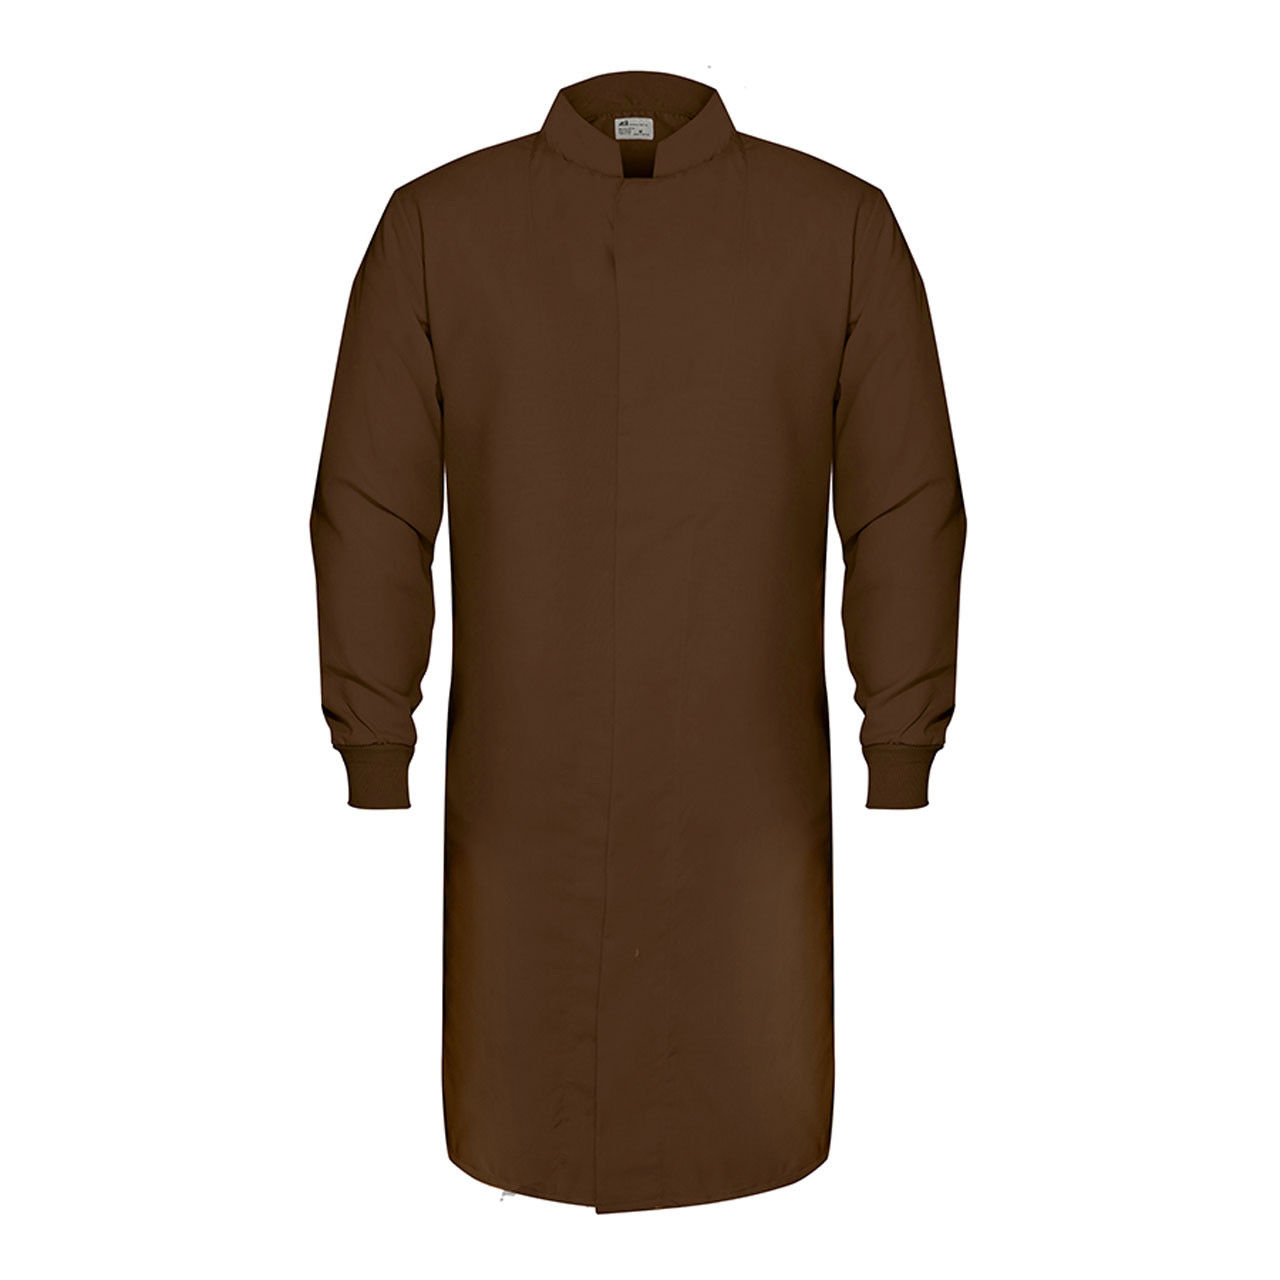 Does the length vary for different sizes of the brown lab coat?